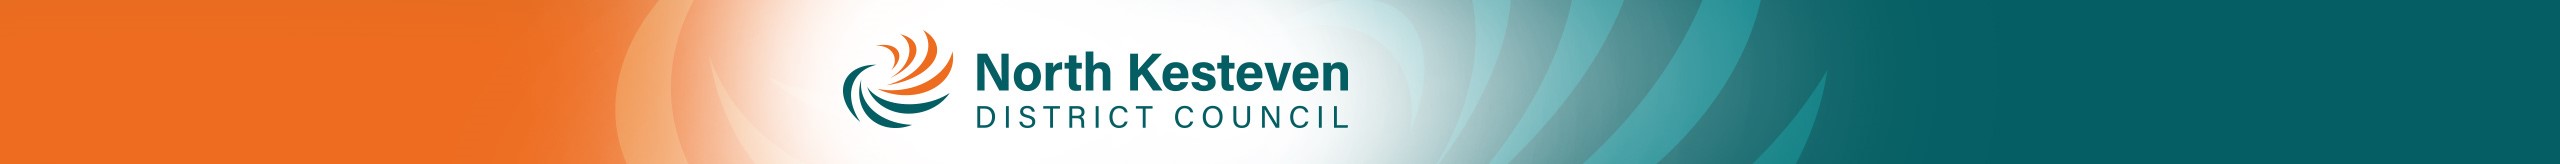 North Kesteven District Council Logo and Masthead and link to the home page